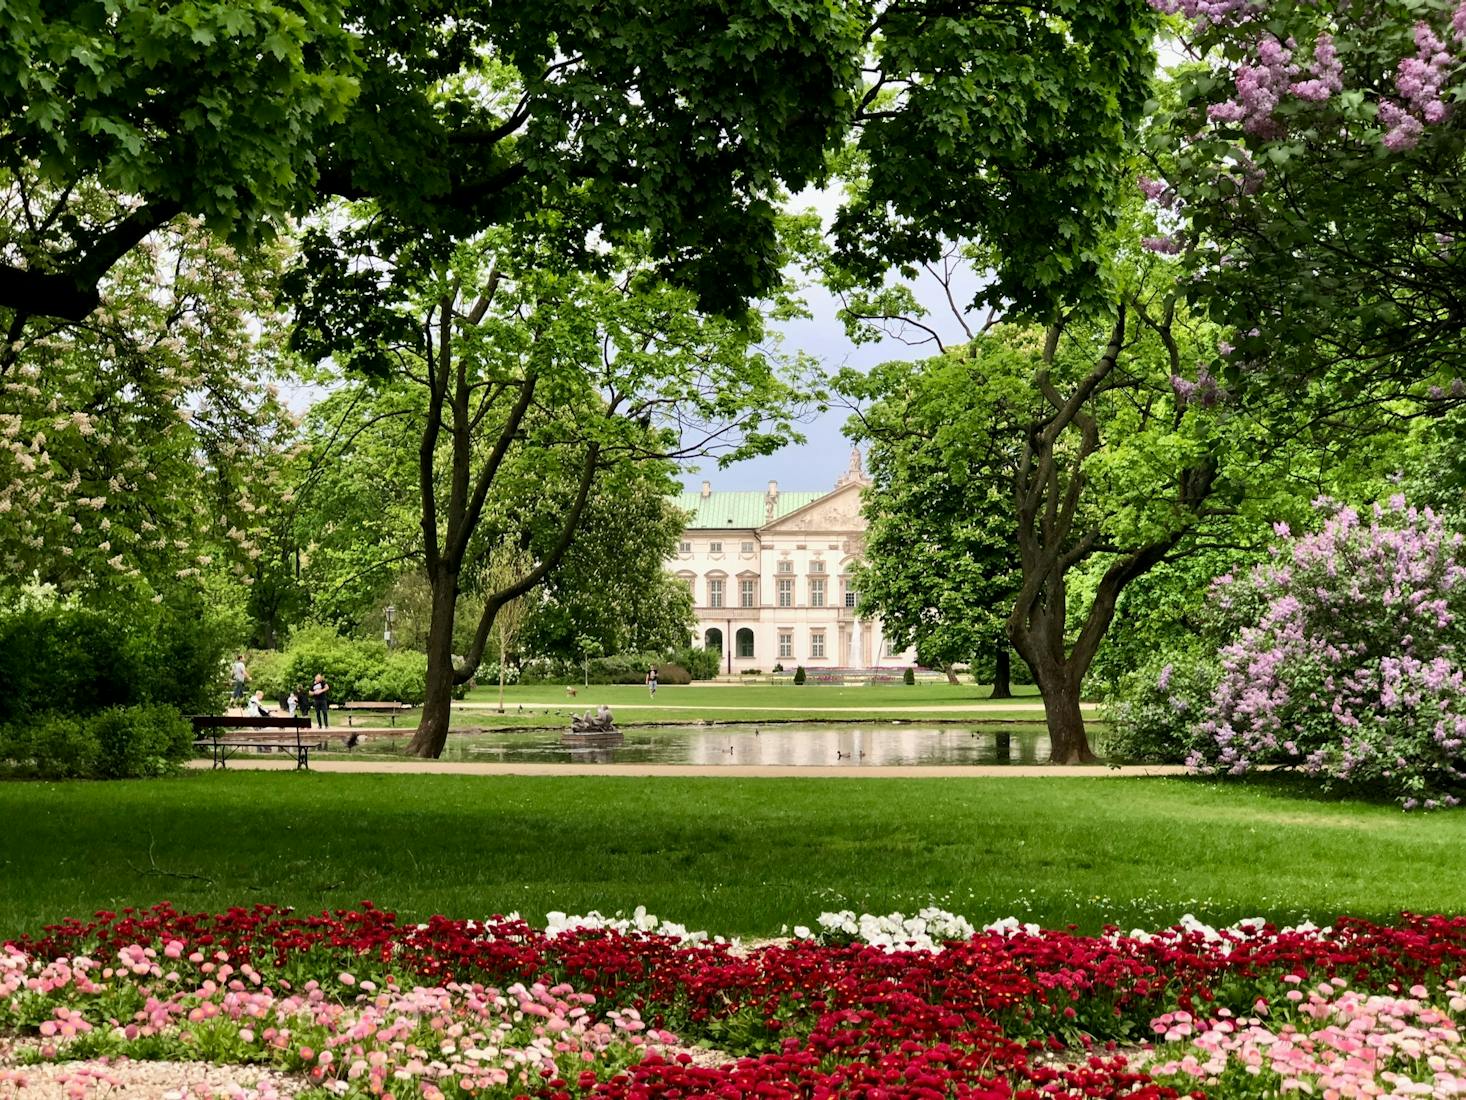 A Warsaw park with a pond and colorful roses in the foreground